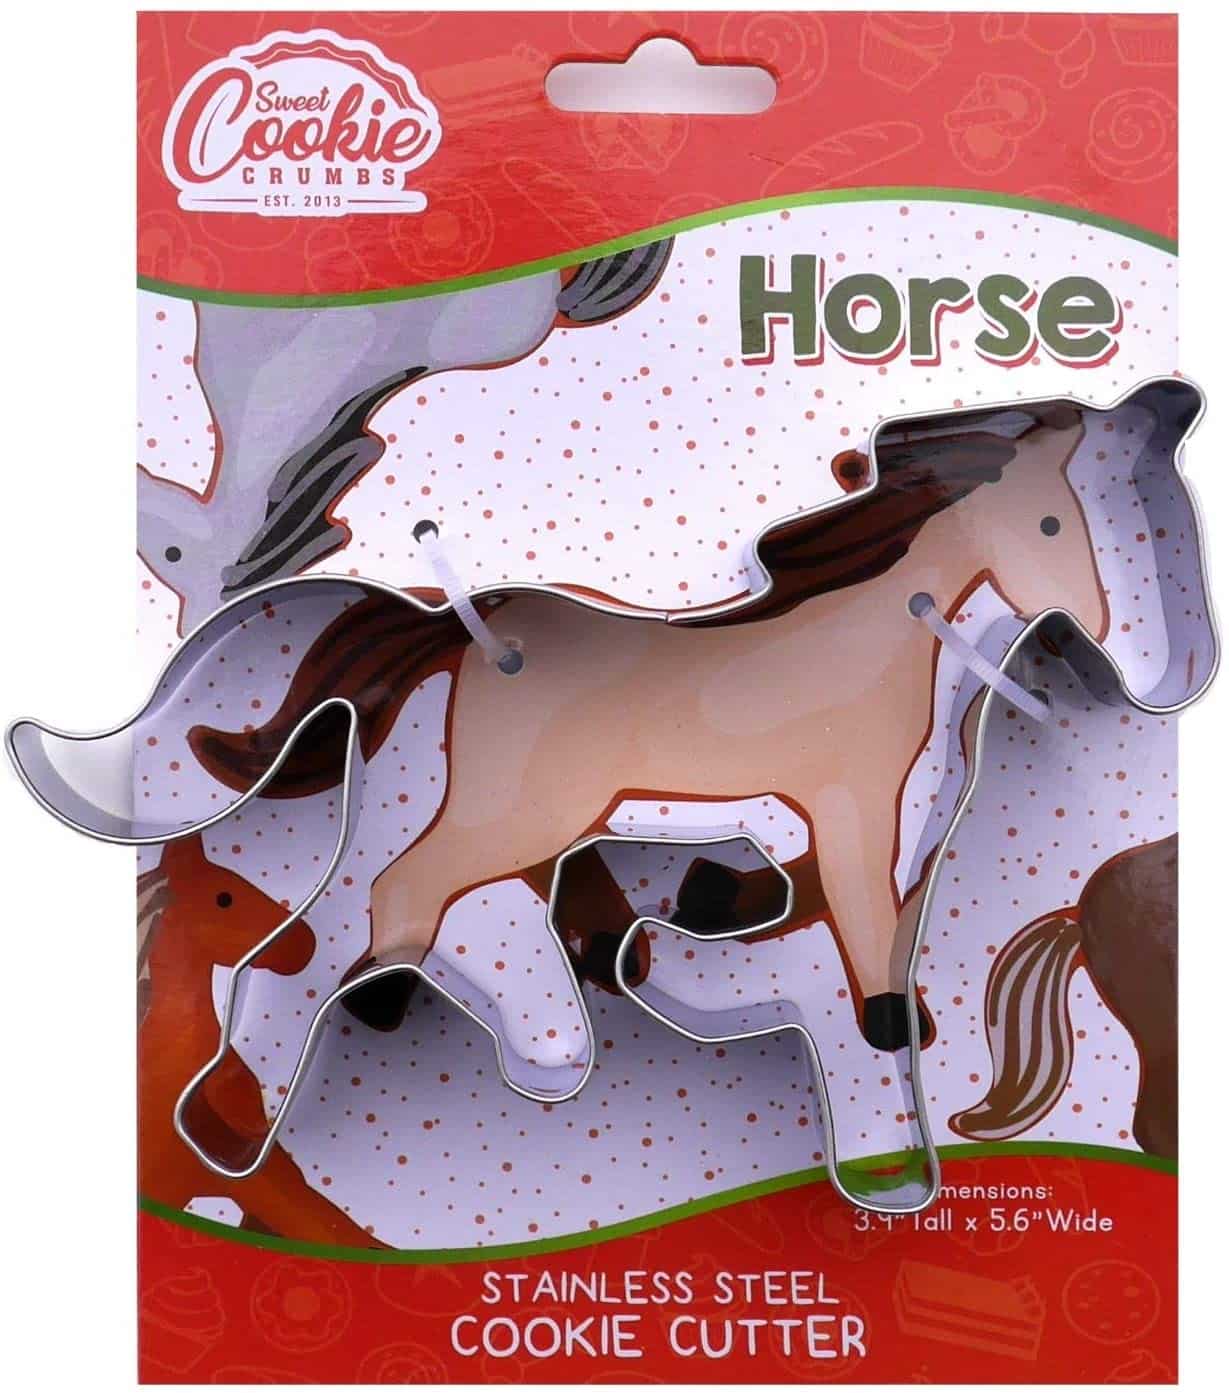 Make Some Horse Cookies!